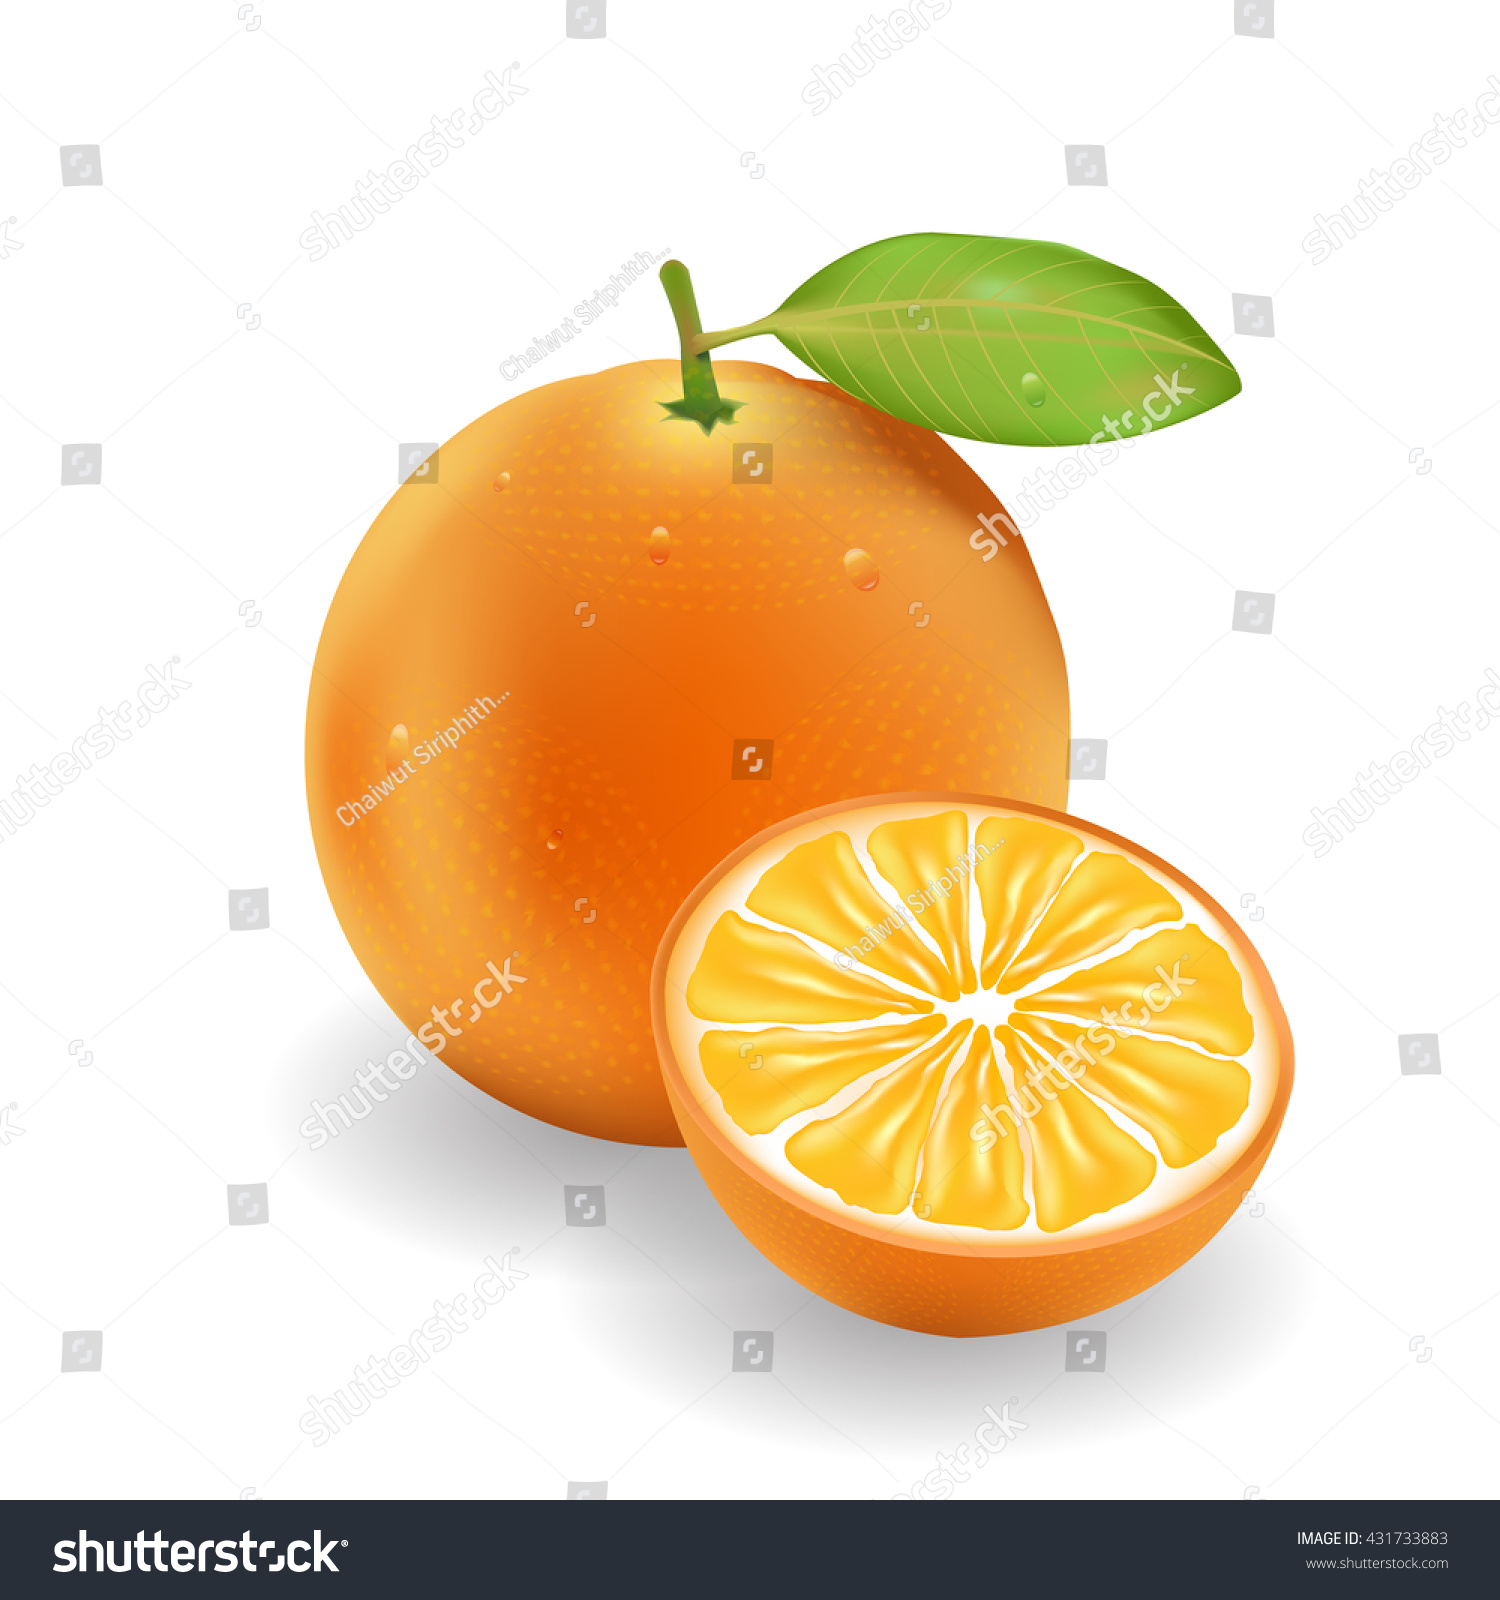 Ripe Oranges Fruits Slices Leaf Isolated Stock Vector 431733883 ...